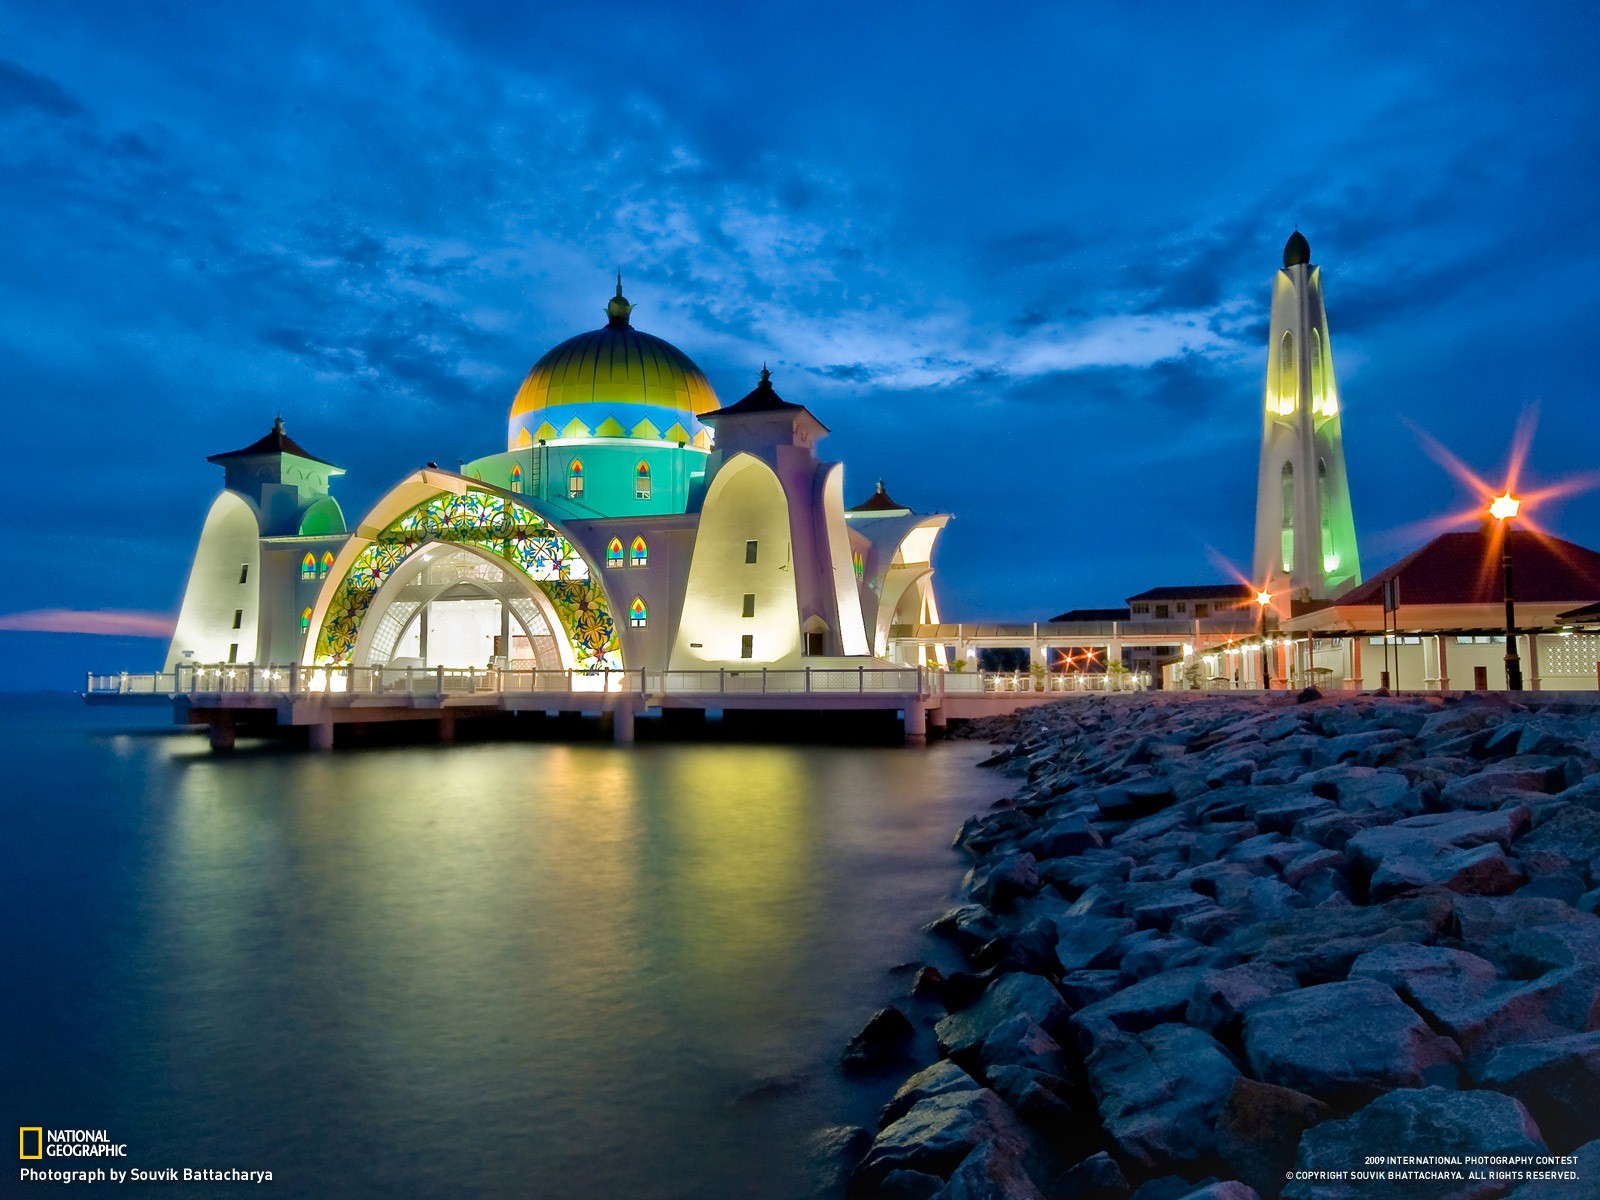 General 1600x1200 architecture beach building mosque Malaysia National Geographic 2010 (Year)